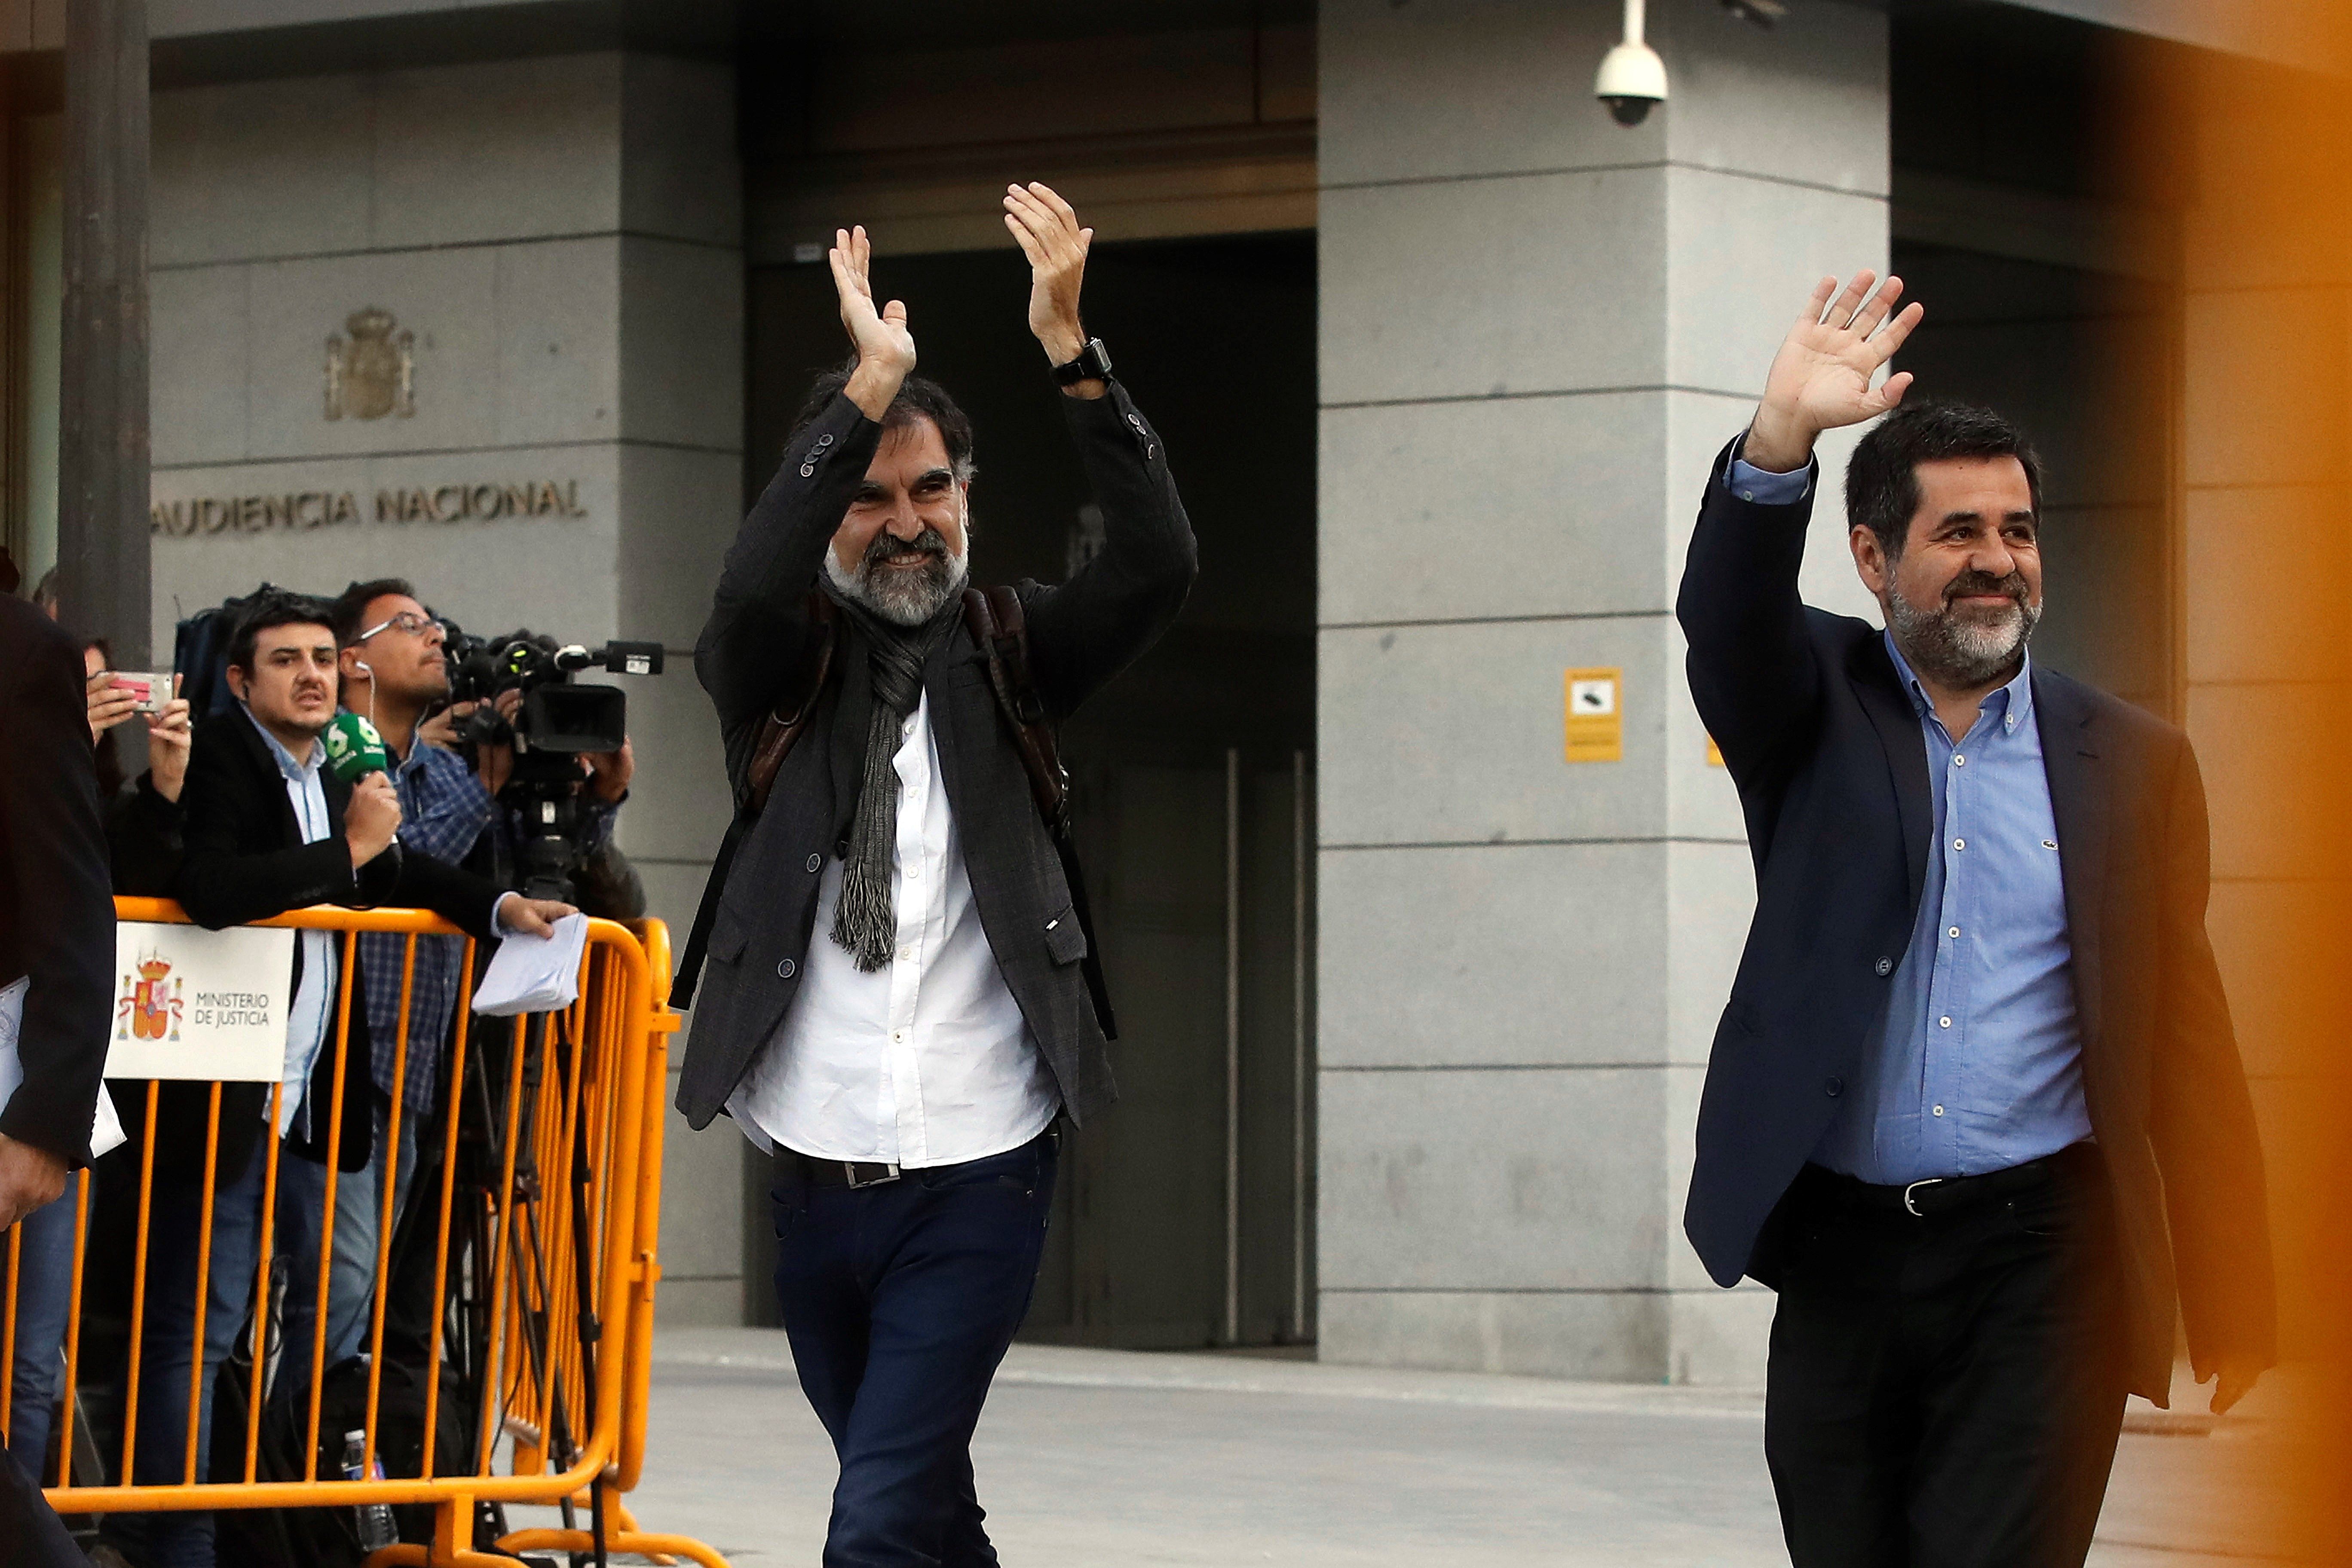 Prison without bail for Catalan independence movement leaders